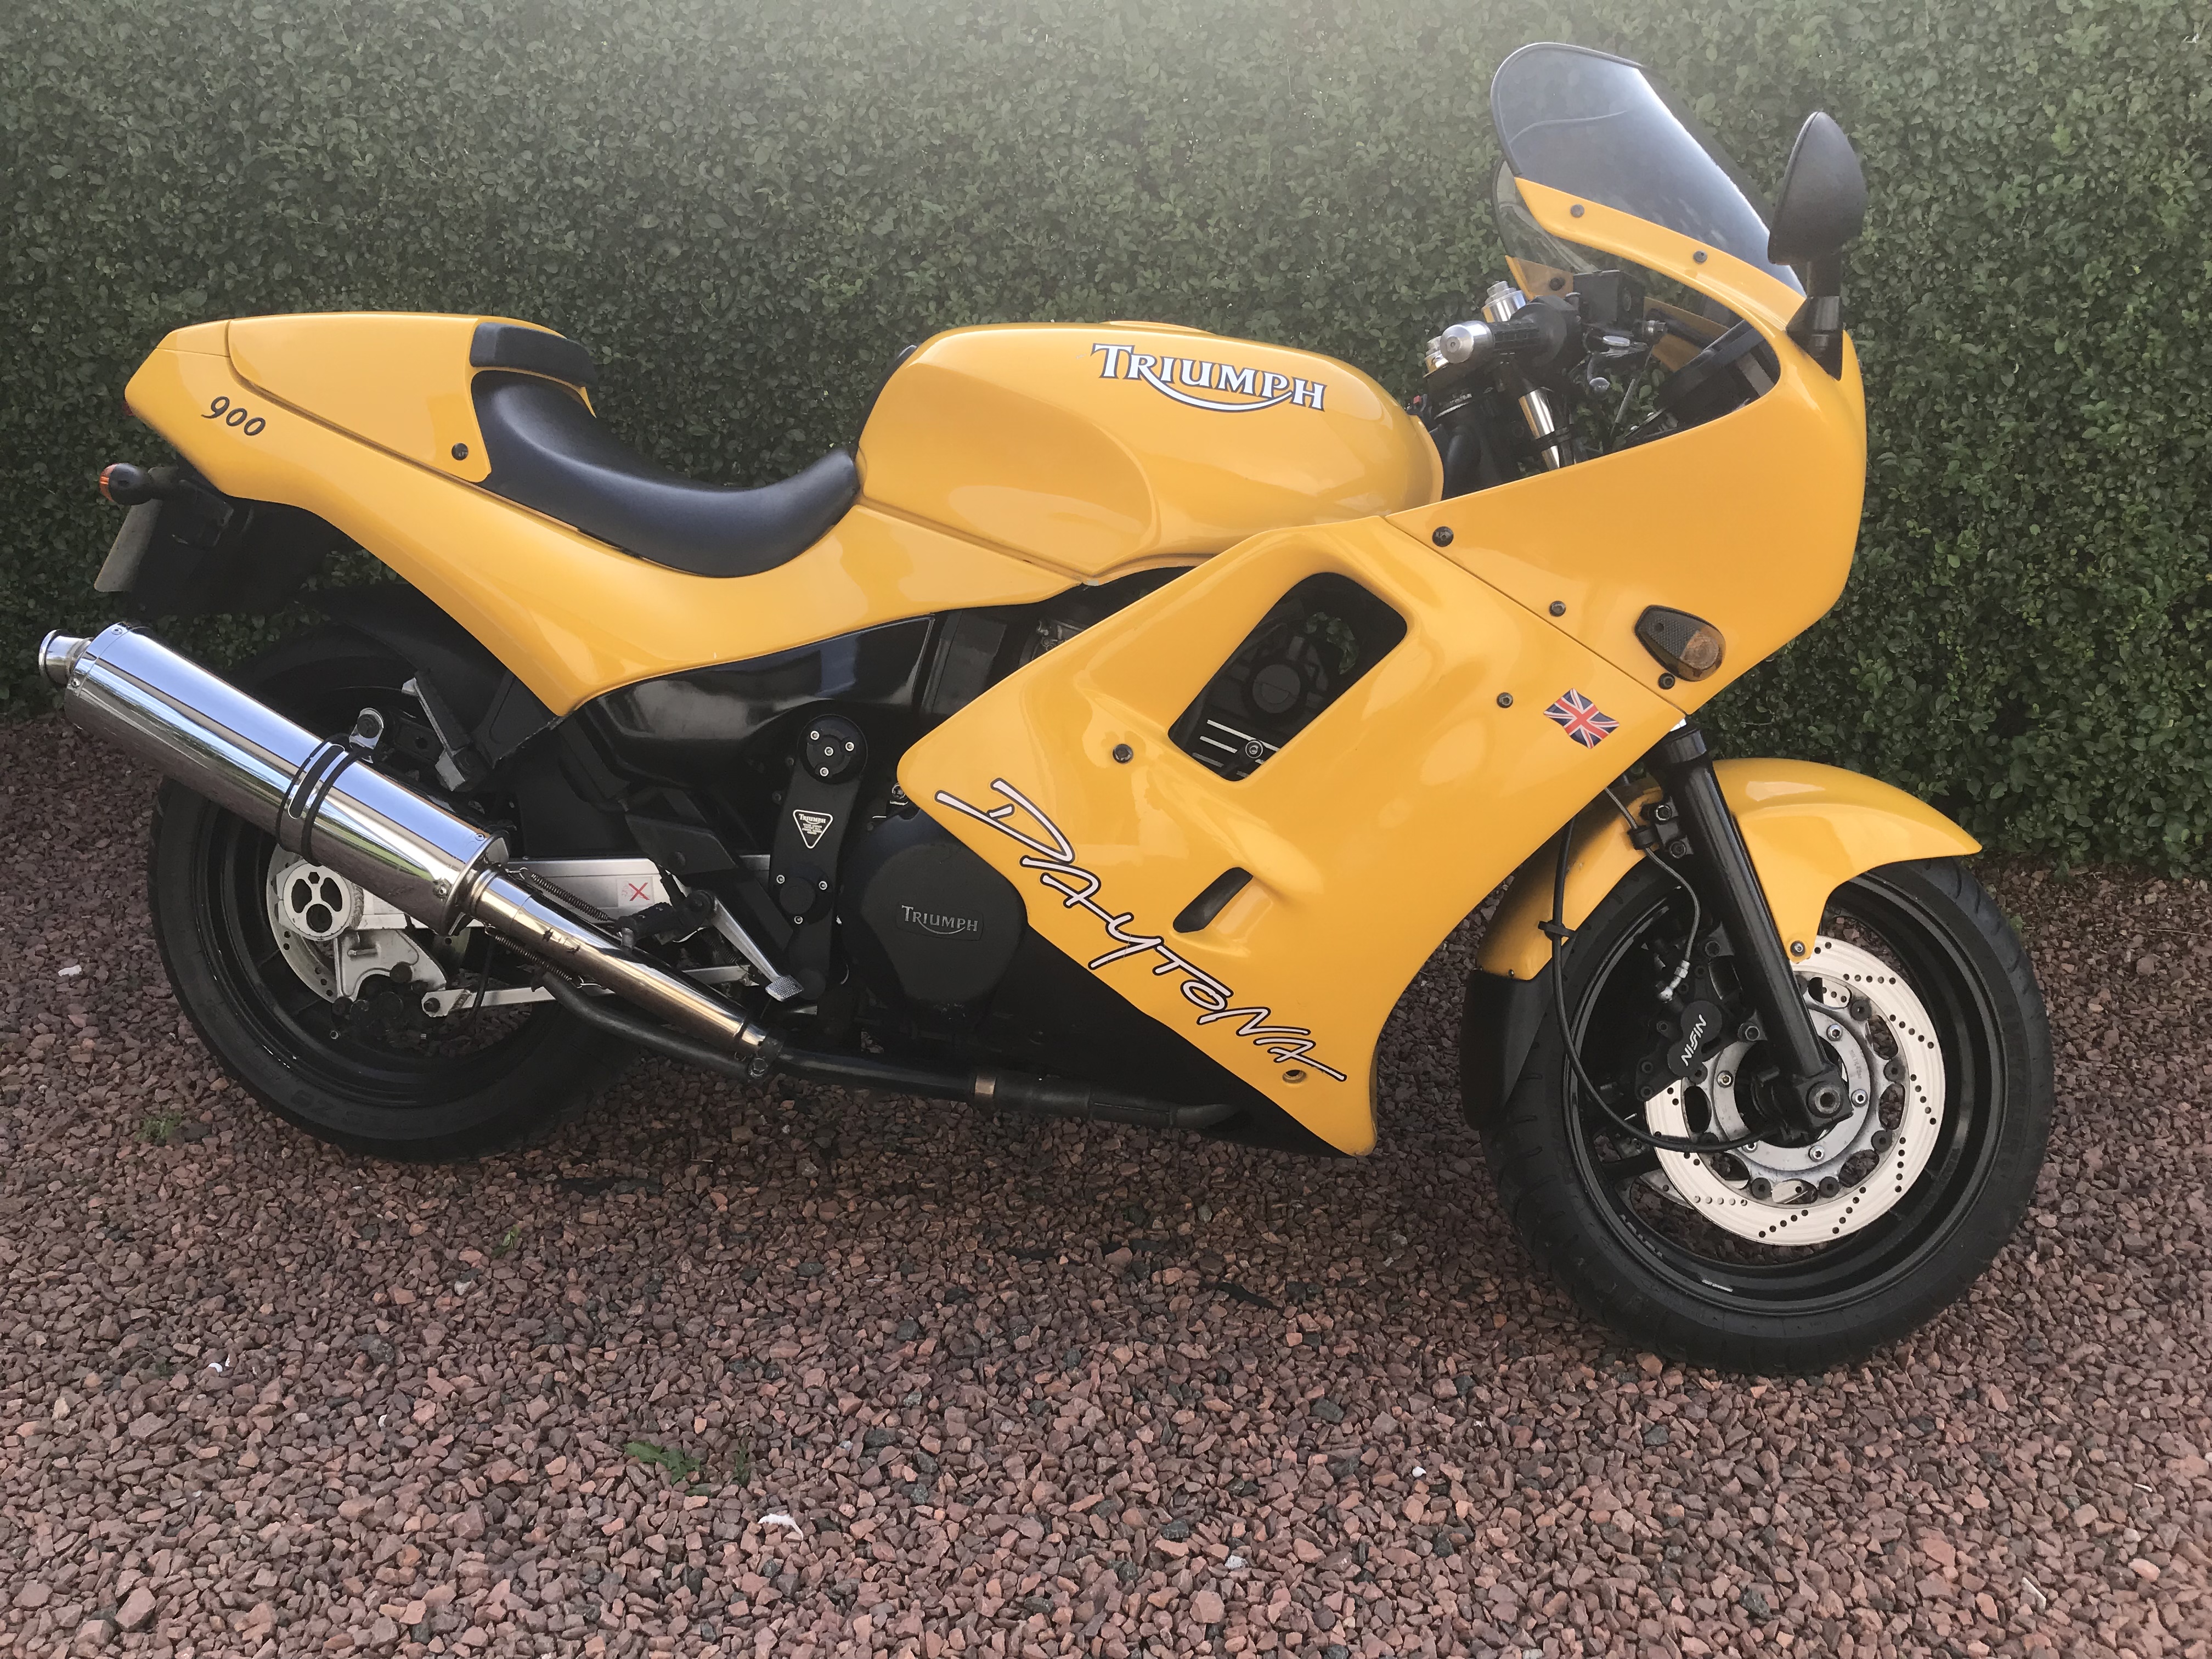 94 Daytona 900 with just 11000 miles - too good to be true? - Page 3 - Biker Banter - PistonHeads